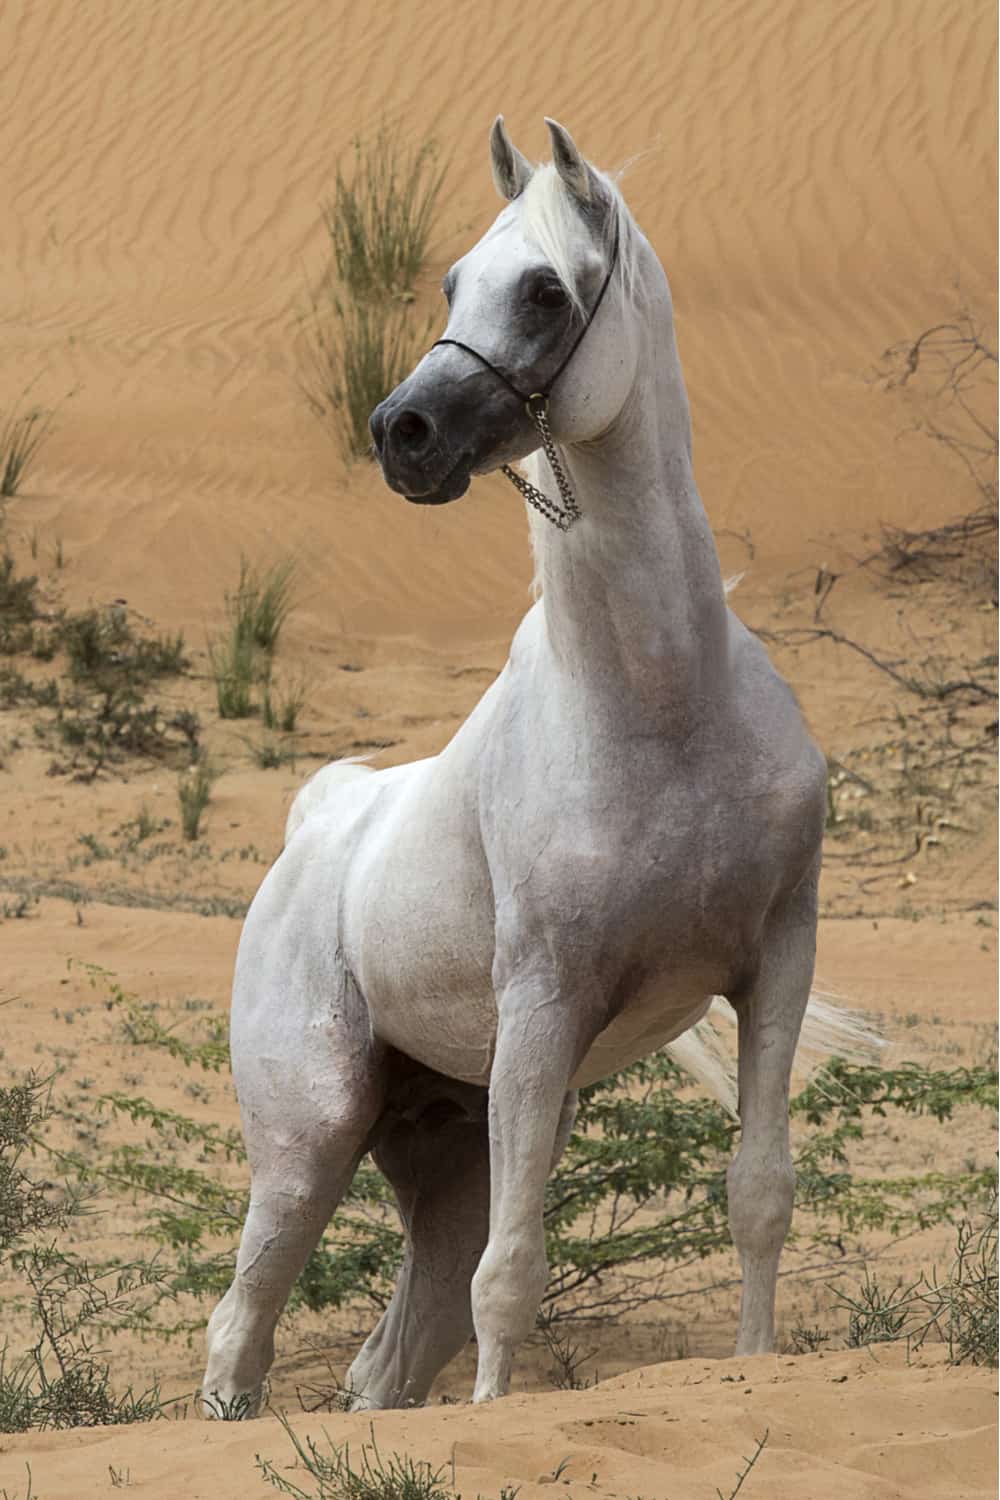 How much does an Arabian horse cost